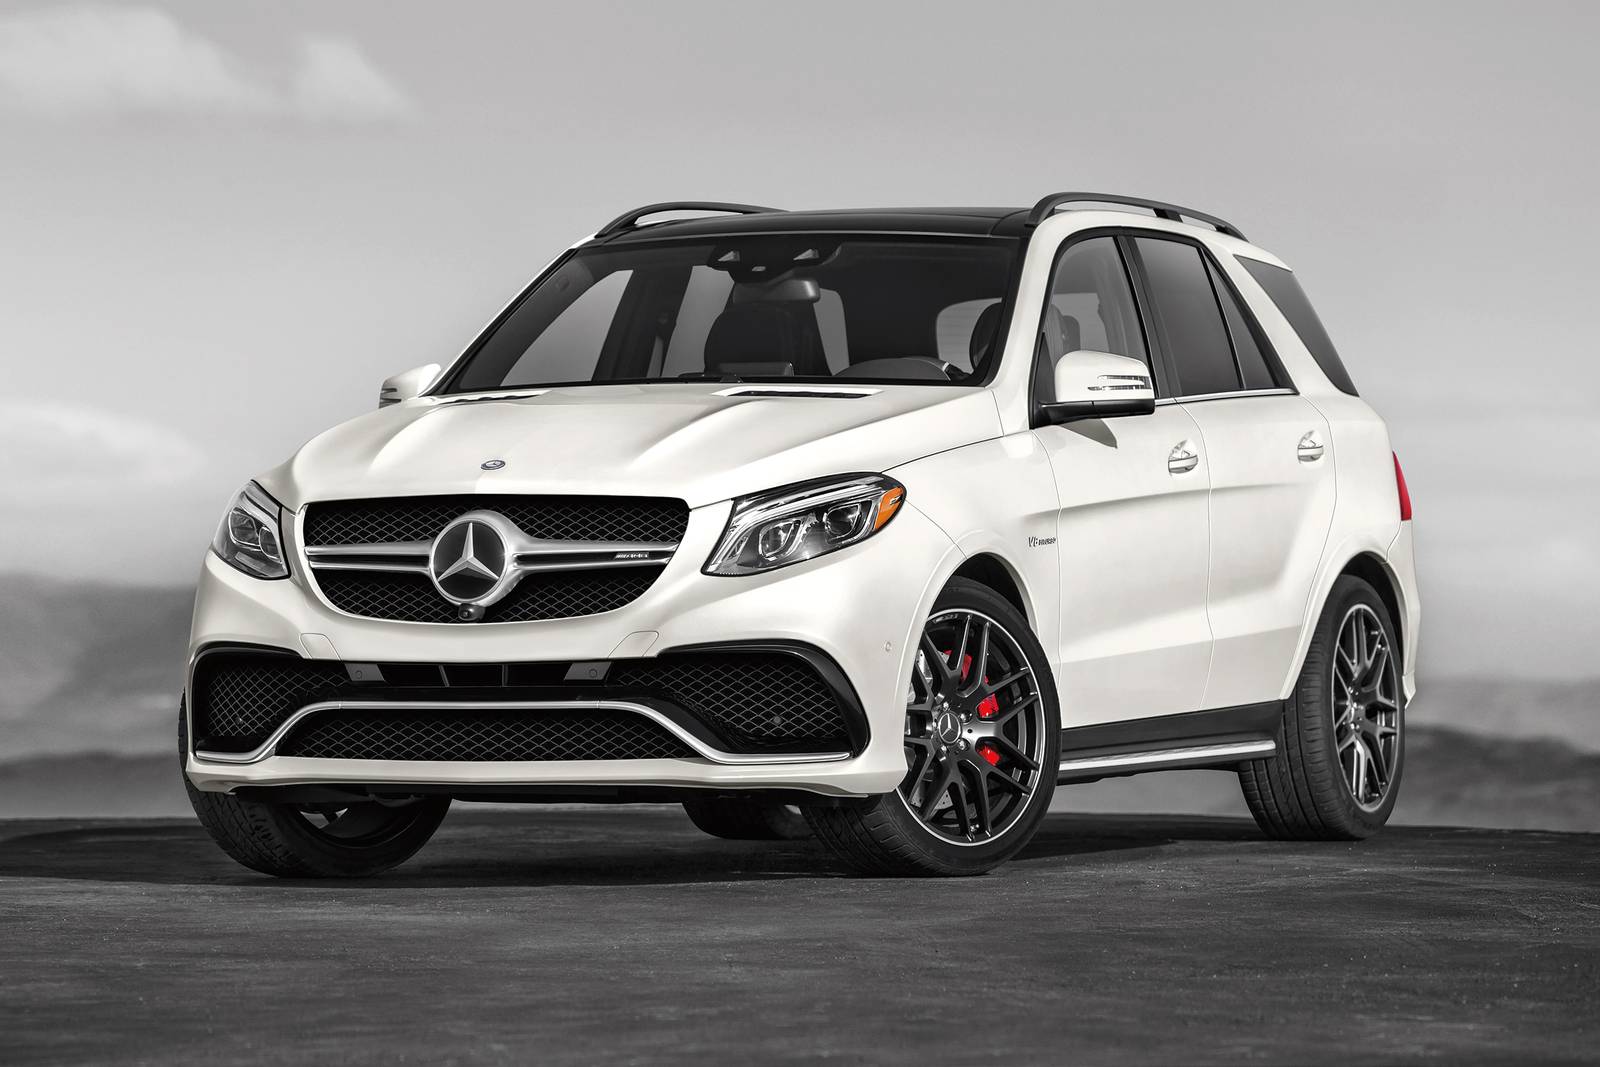 Used 2018 Mercedes-Benz GLE-Class AMG GLE 63 S 4MATIC Review | Edmunds